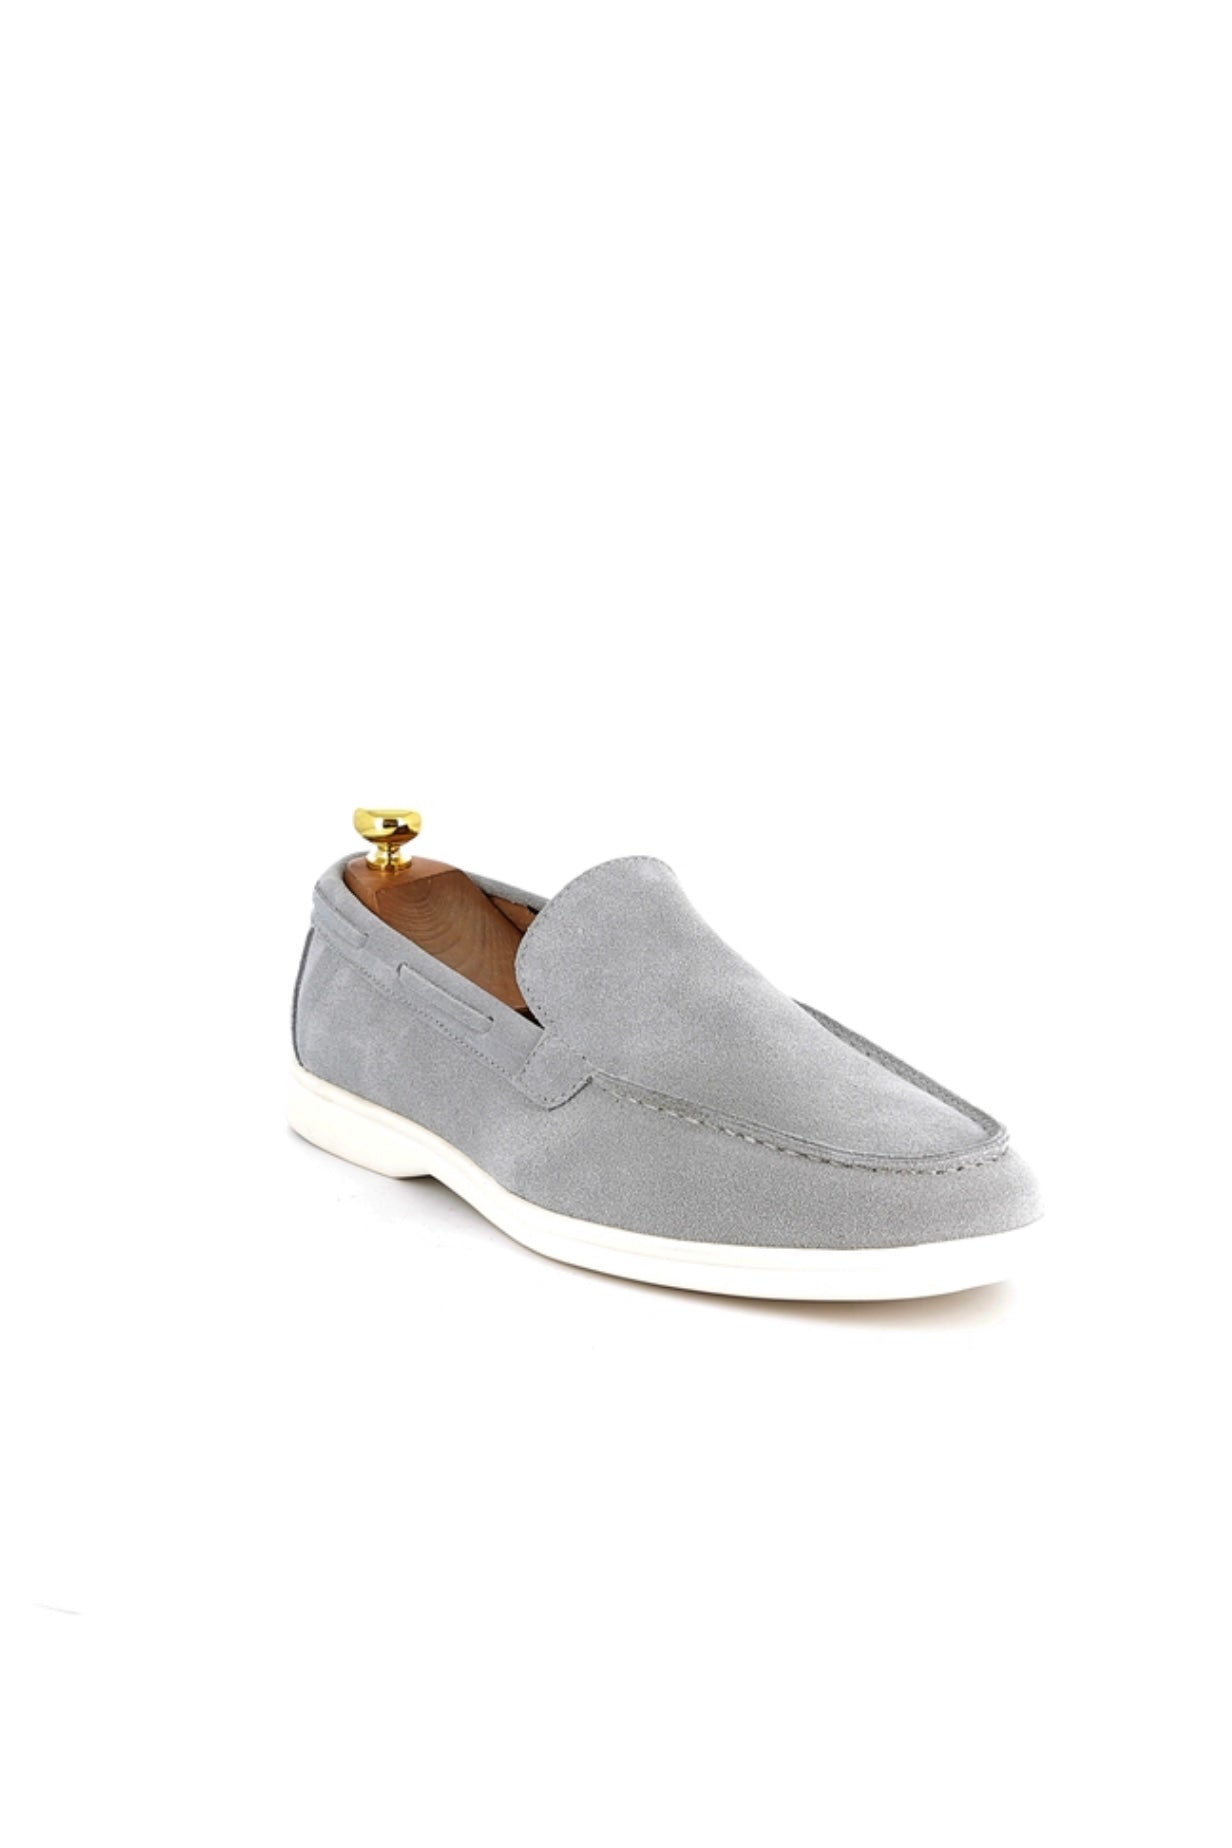 THE MILANO LOAFERS - GREY